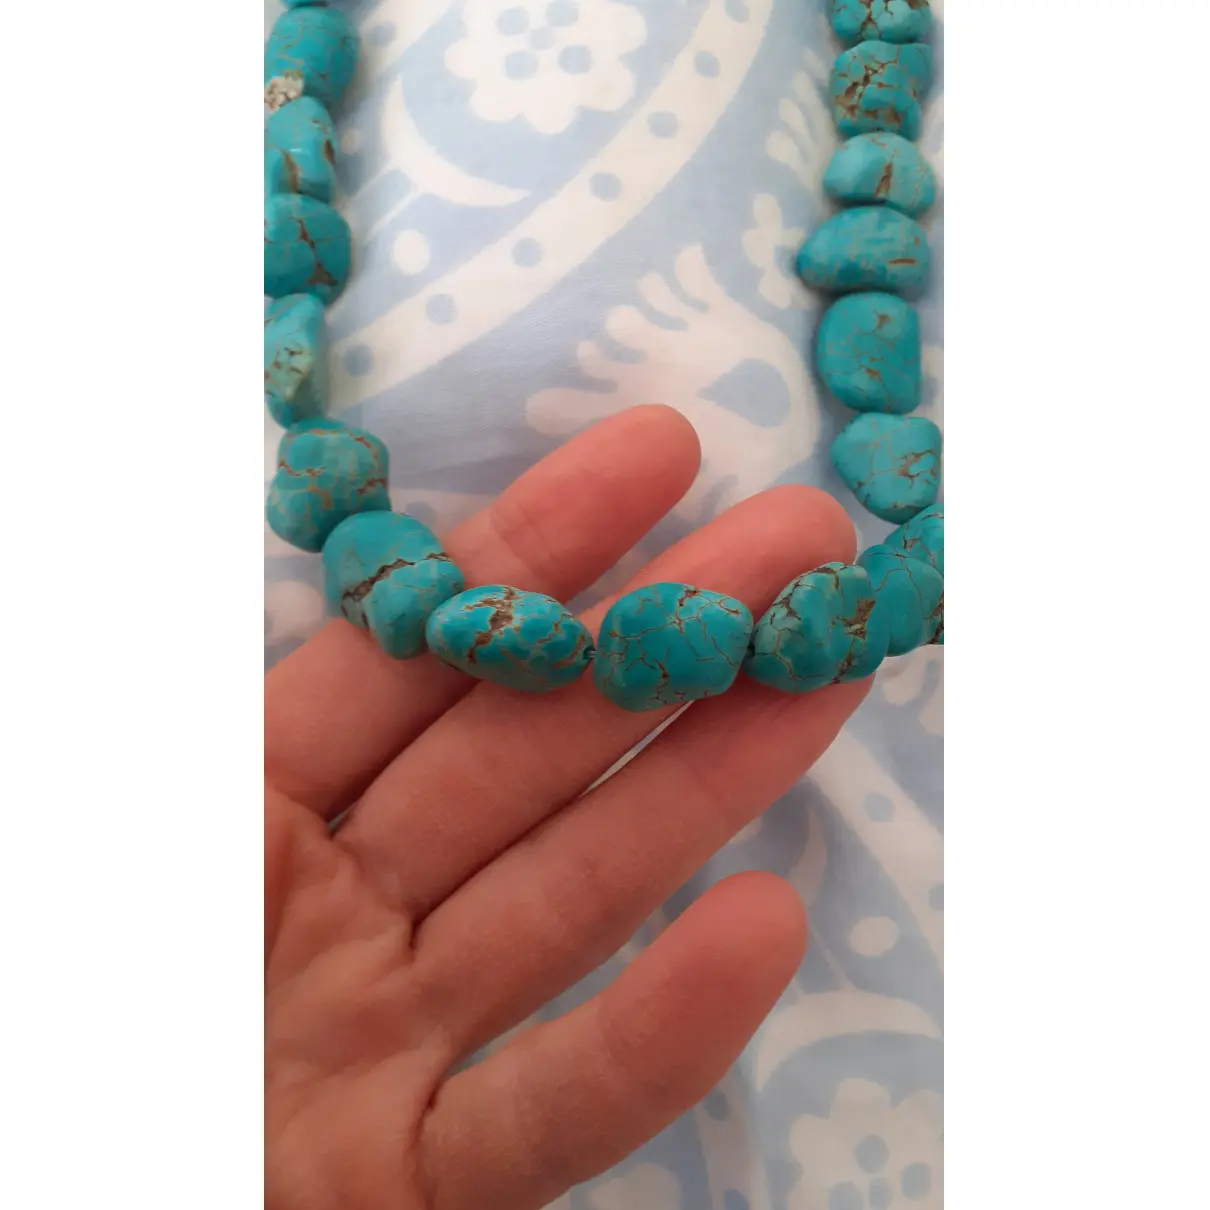 Buy Source Unknown Necklace online